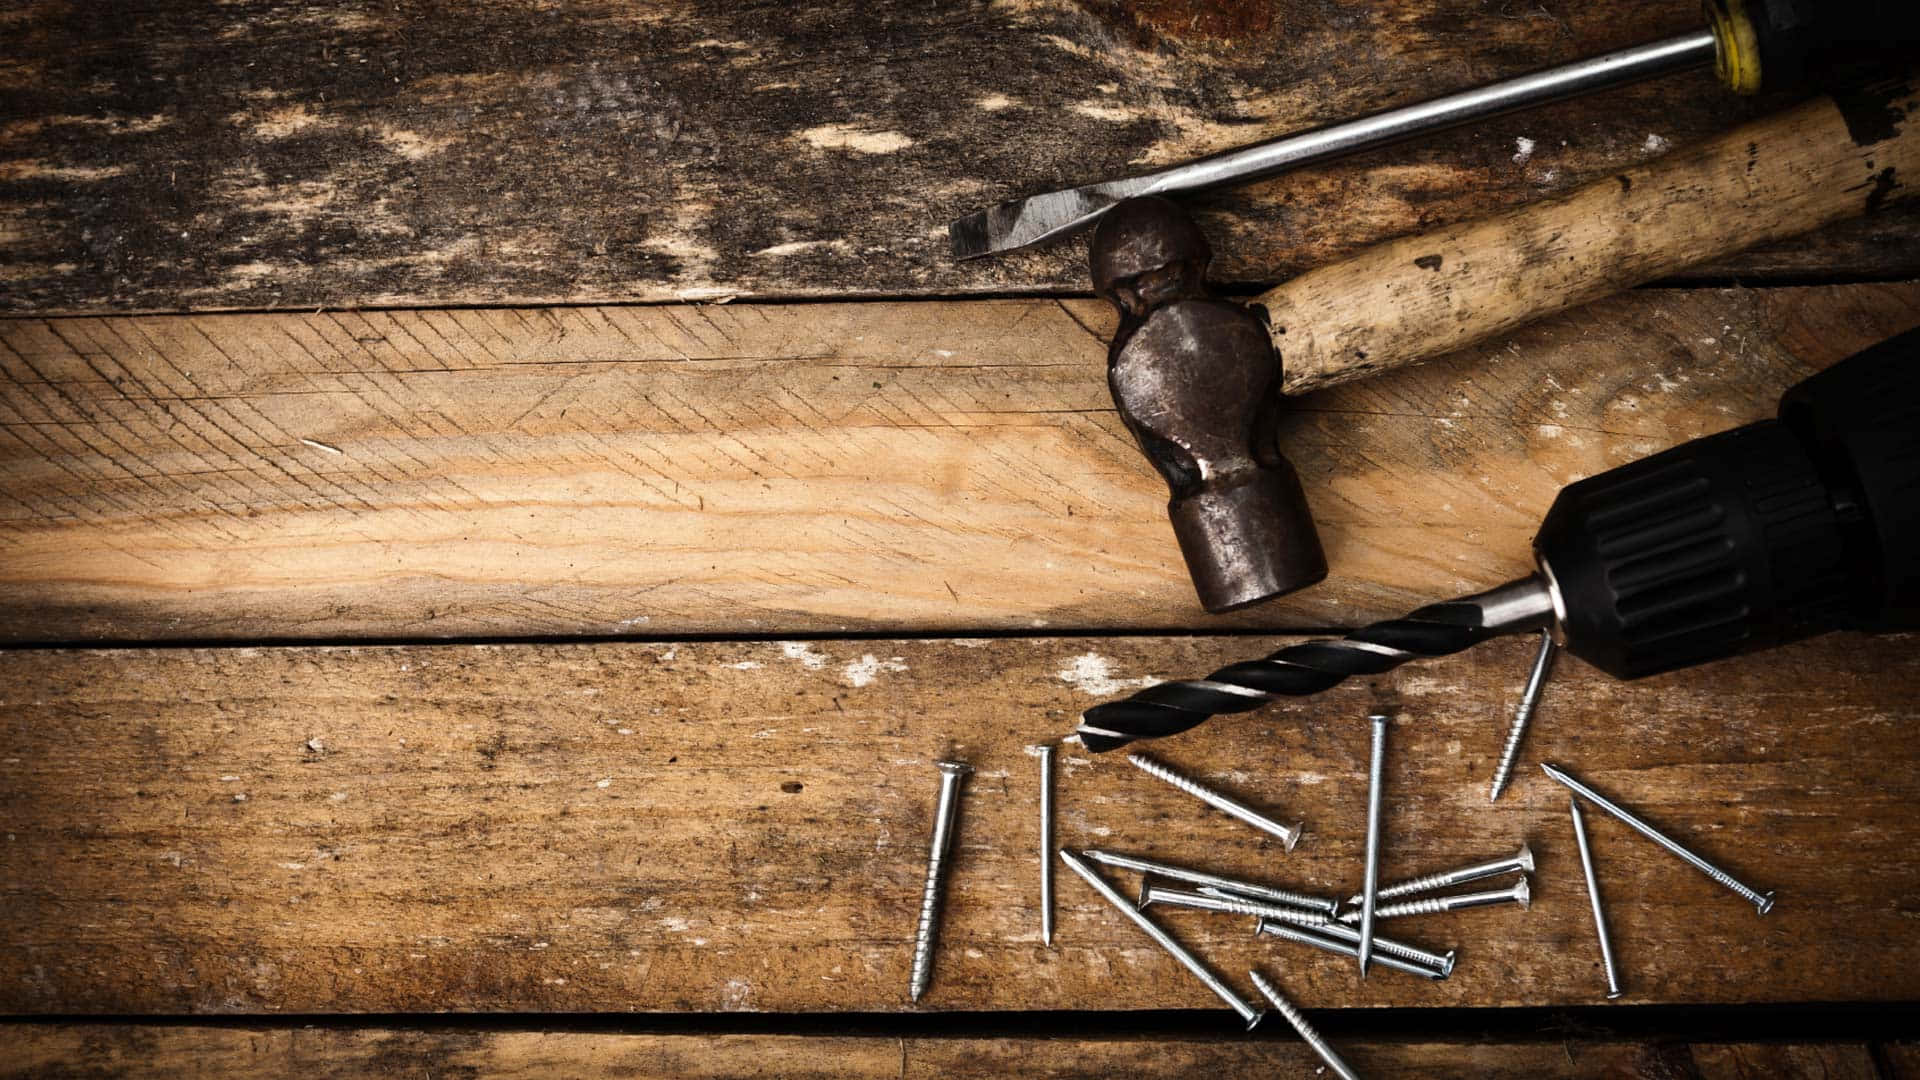 A Drill, Screwdriver, And Nails On A Wooden Table